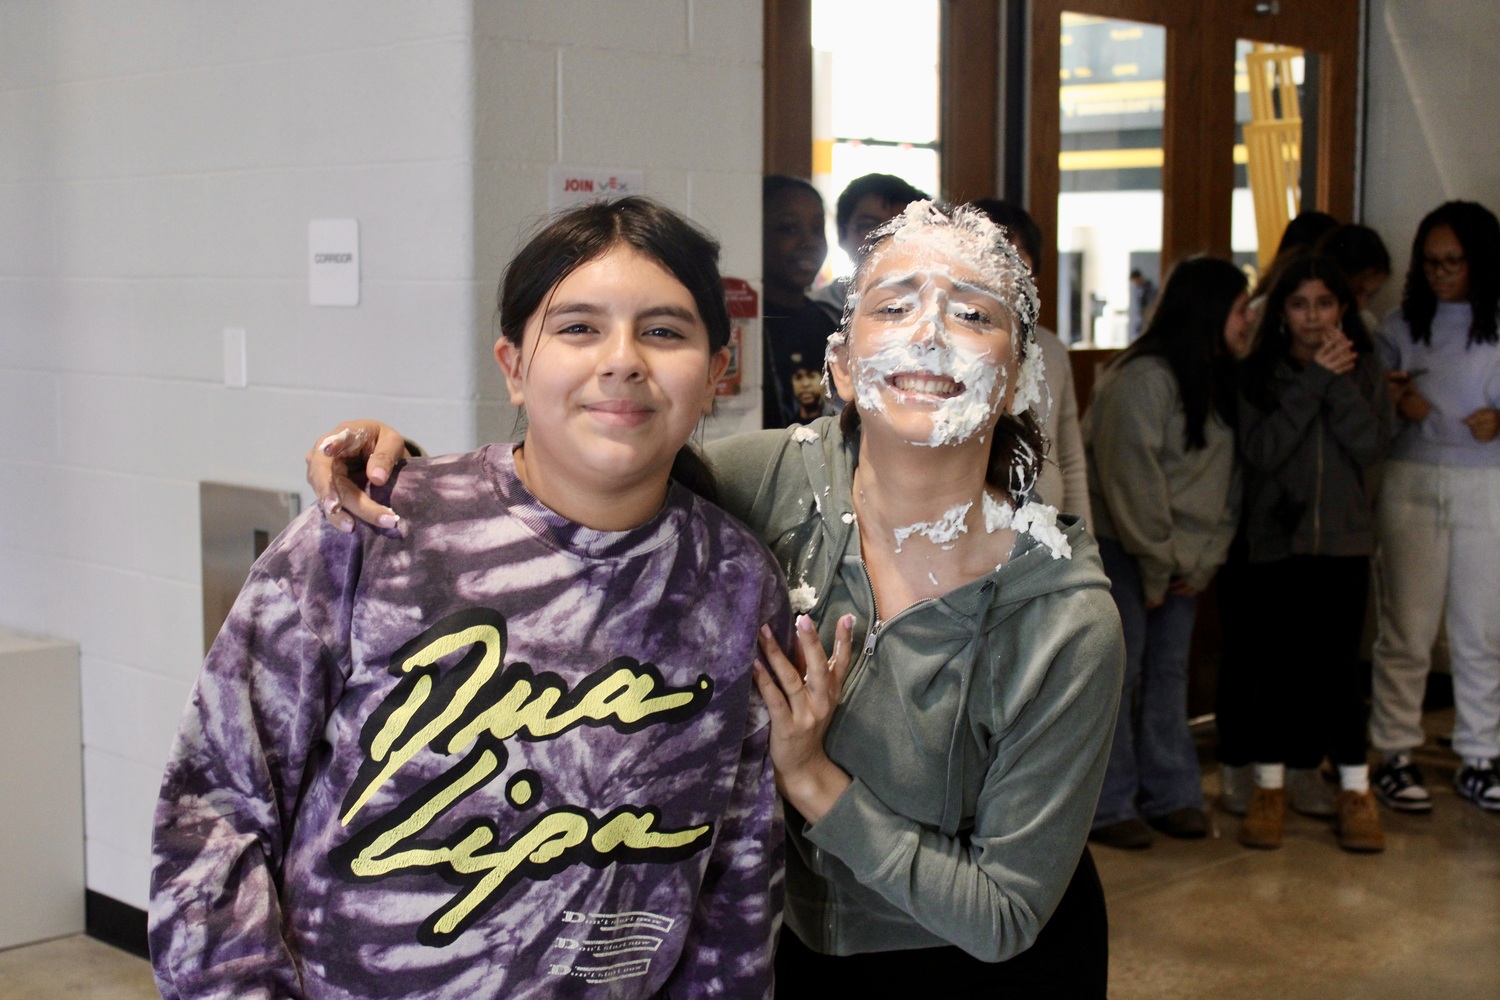 In honor of Pi Day, observed on March 14, Bridgehampton Union Free School
District’s sixth grade class took part in a fun educational competition. Whoever could
memorize and recite the most digits of Pi would get the chance to “pie” sixth grade teacher
Julianna Pronesti in the face. This year, sixth grader Zoe Urgiles memorized 100 digits of pi,
the most any sixth grader has memorized.
Bridgehampton School has held this annual competition for nearly five years and
hopes that next year someone will break the new record. COURTESY BRIDGEHAMPTON SCHOOL DISTRICT